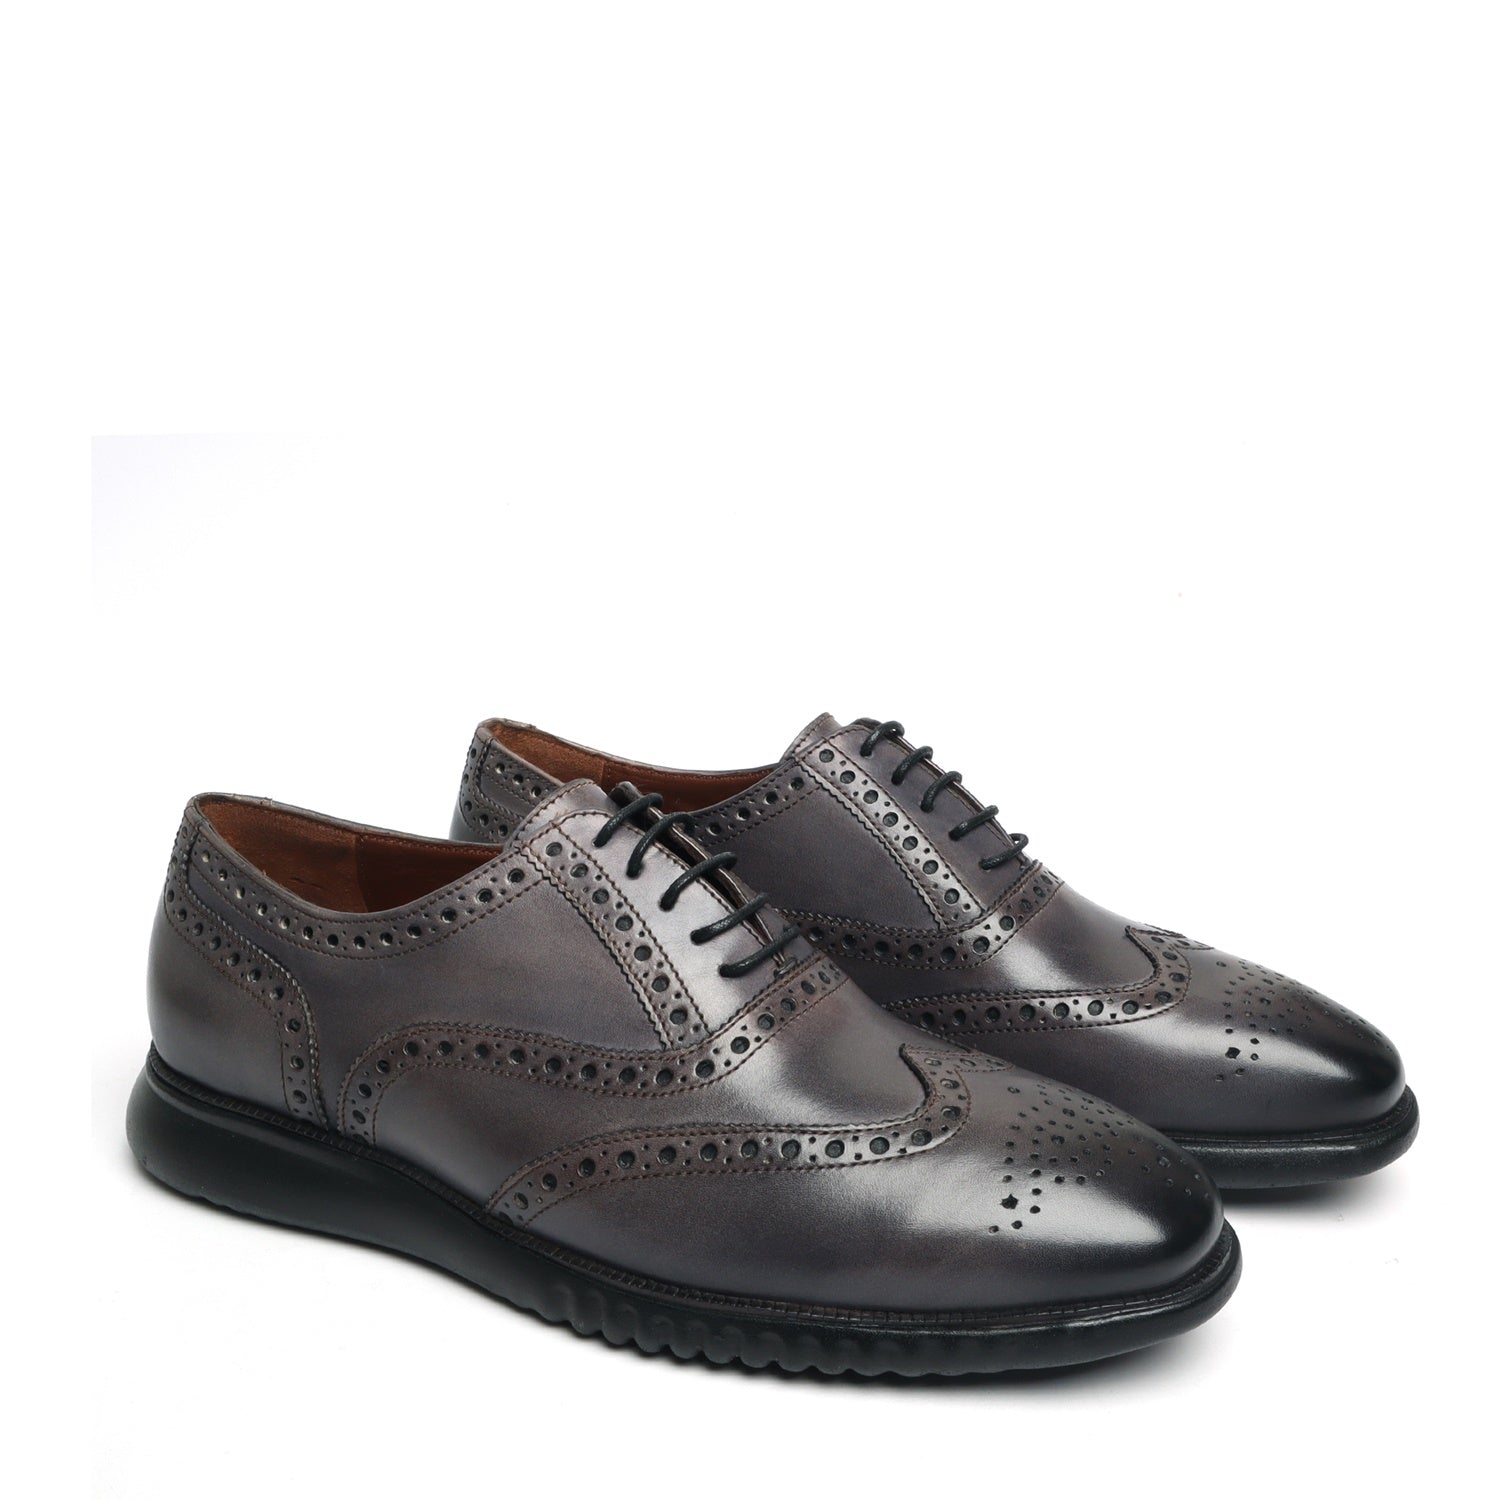 Light Weight Collection Grey Leather Brogue Shoe with Flat Cushioned Sole